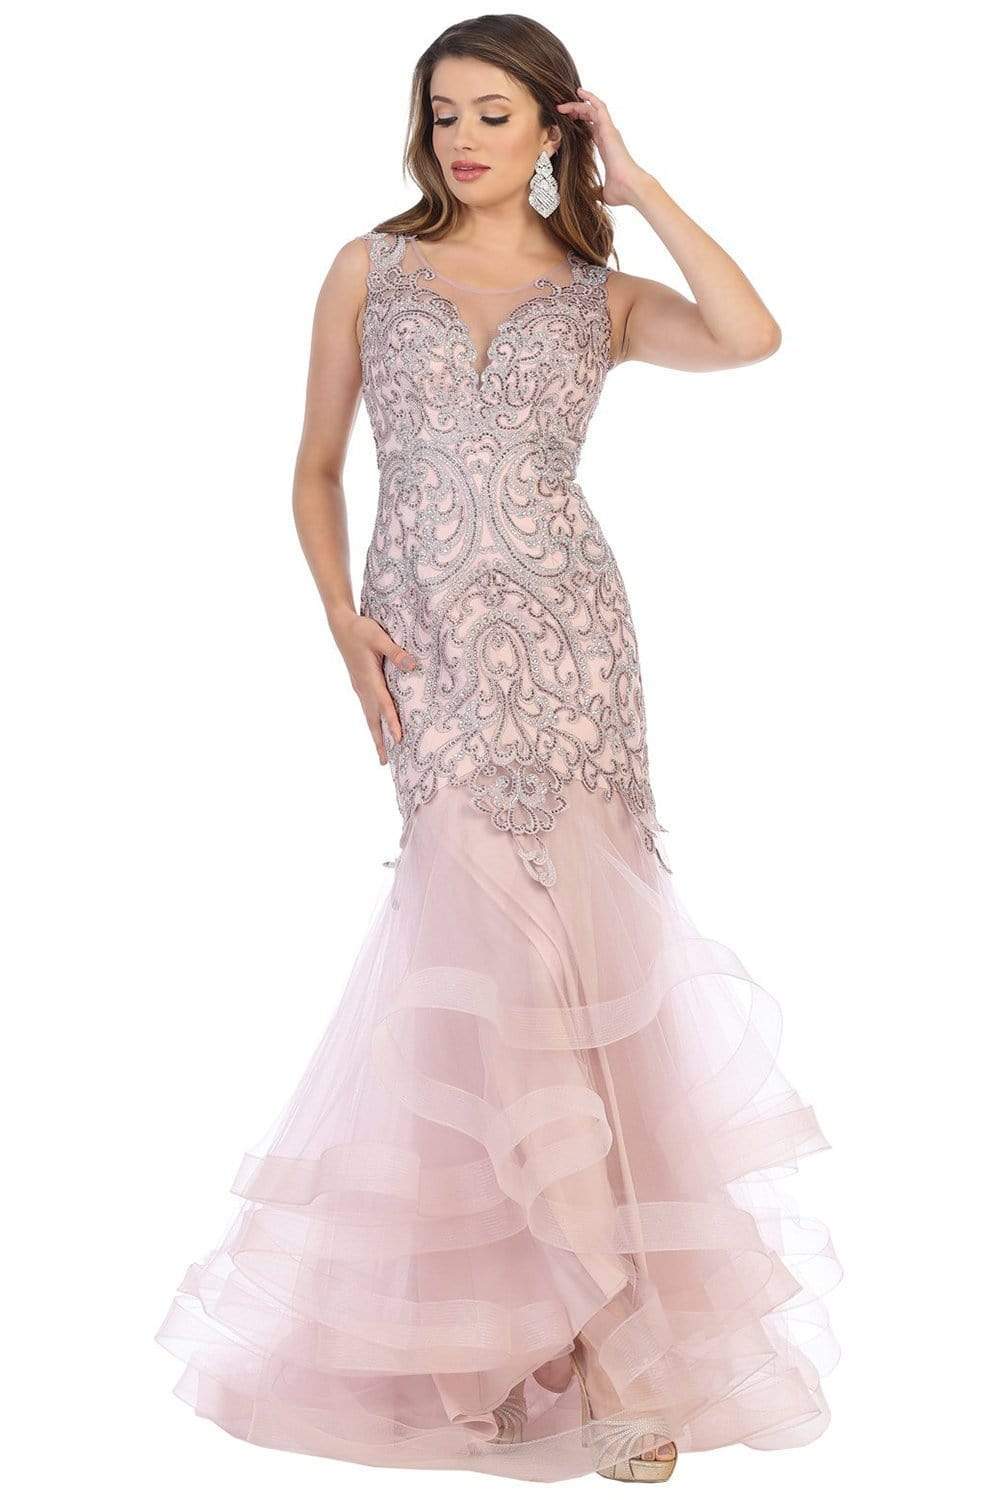 May Queen - RQ7778 Embroidered Ruffled Trumpet Dress Prom Dresses 6 / Mauve